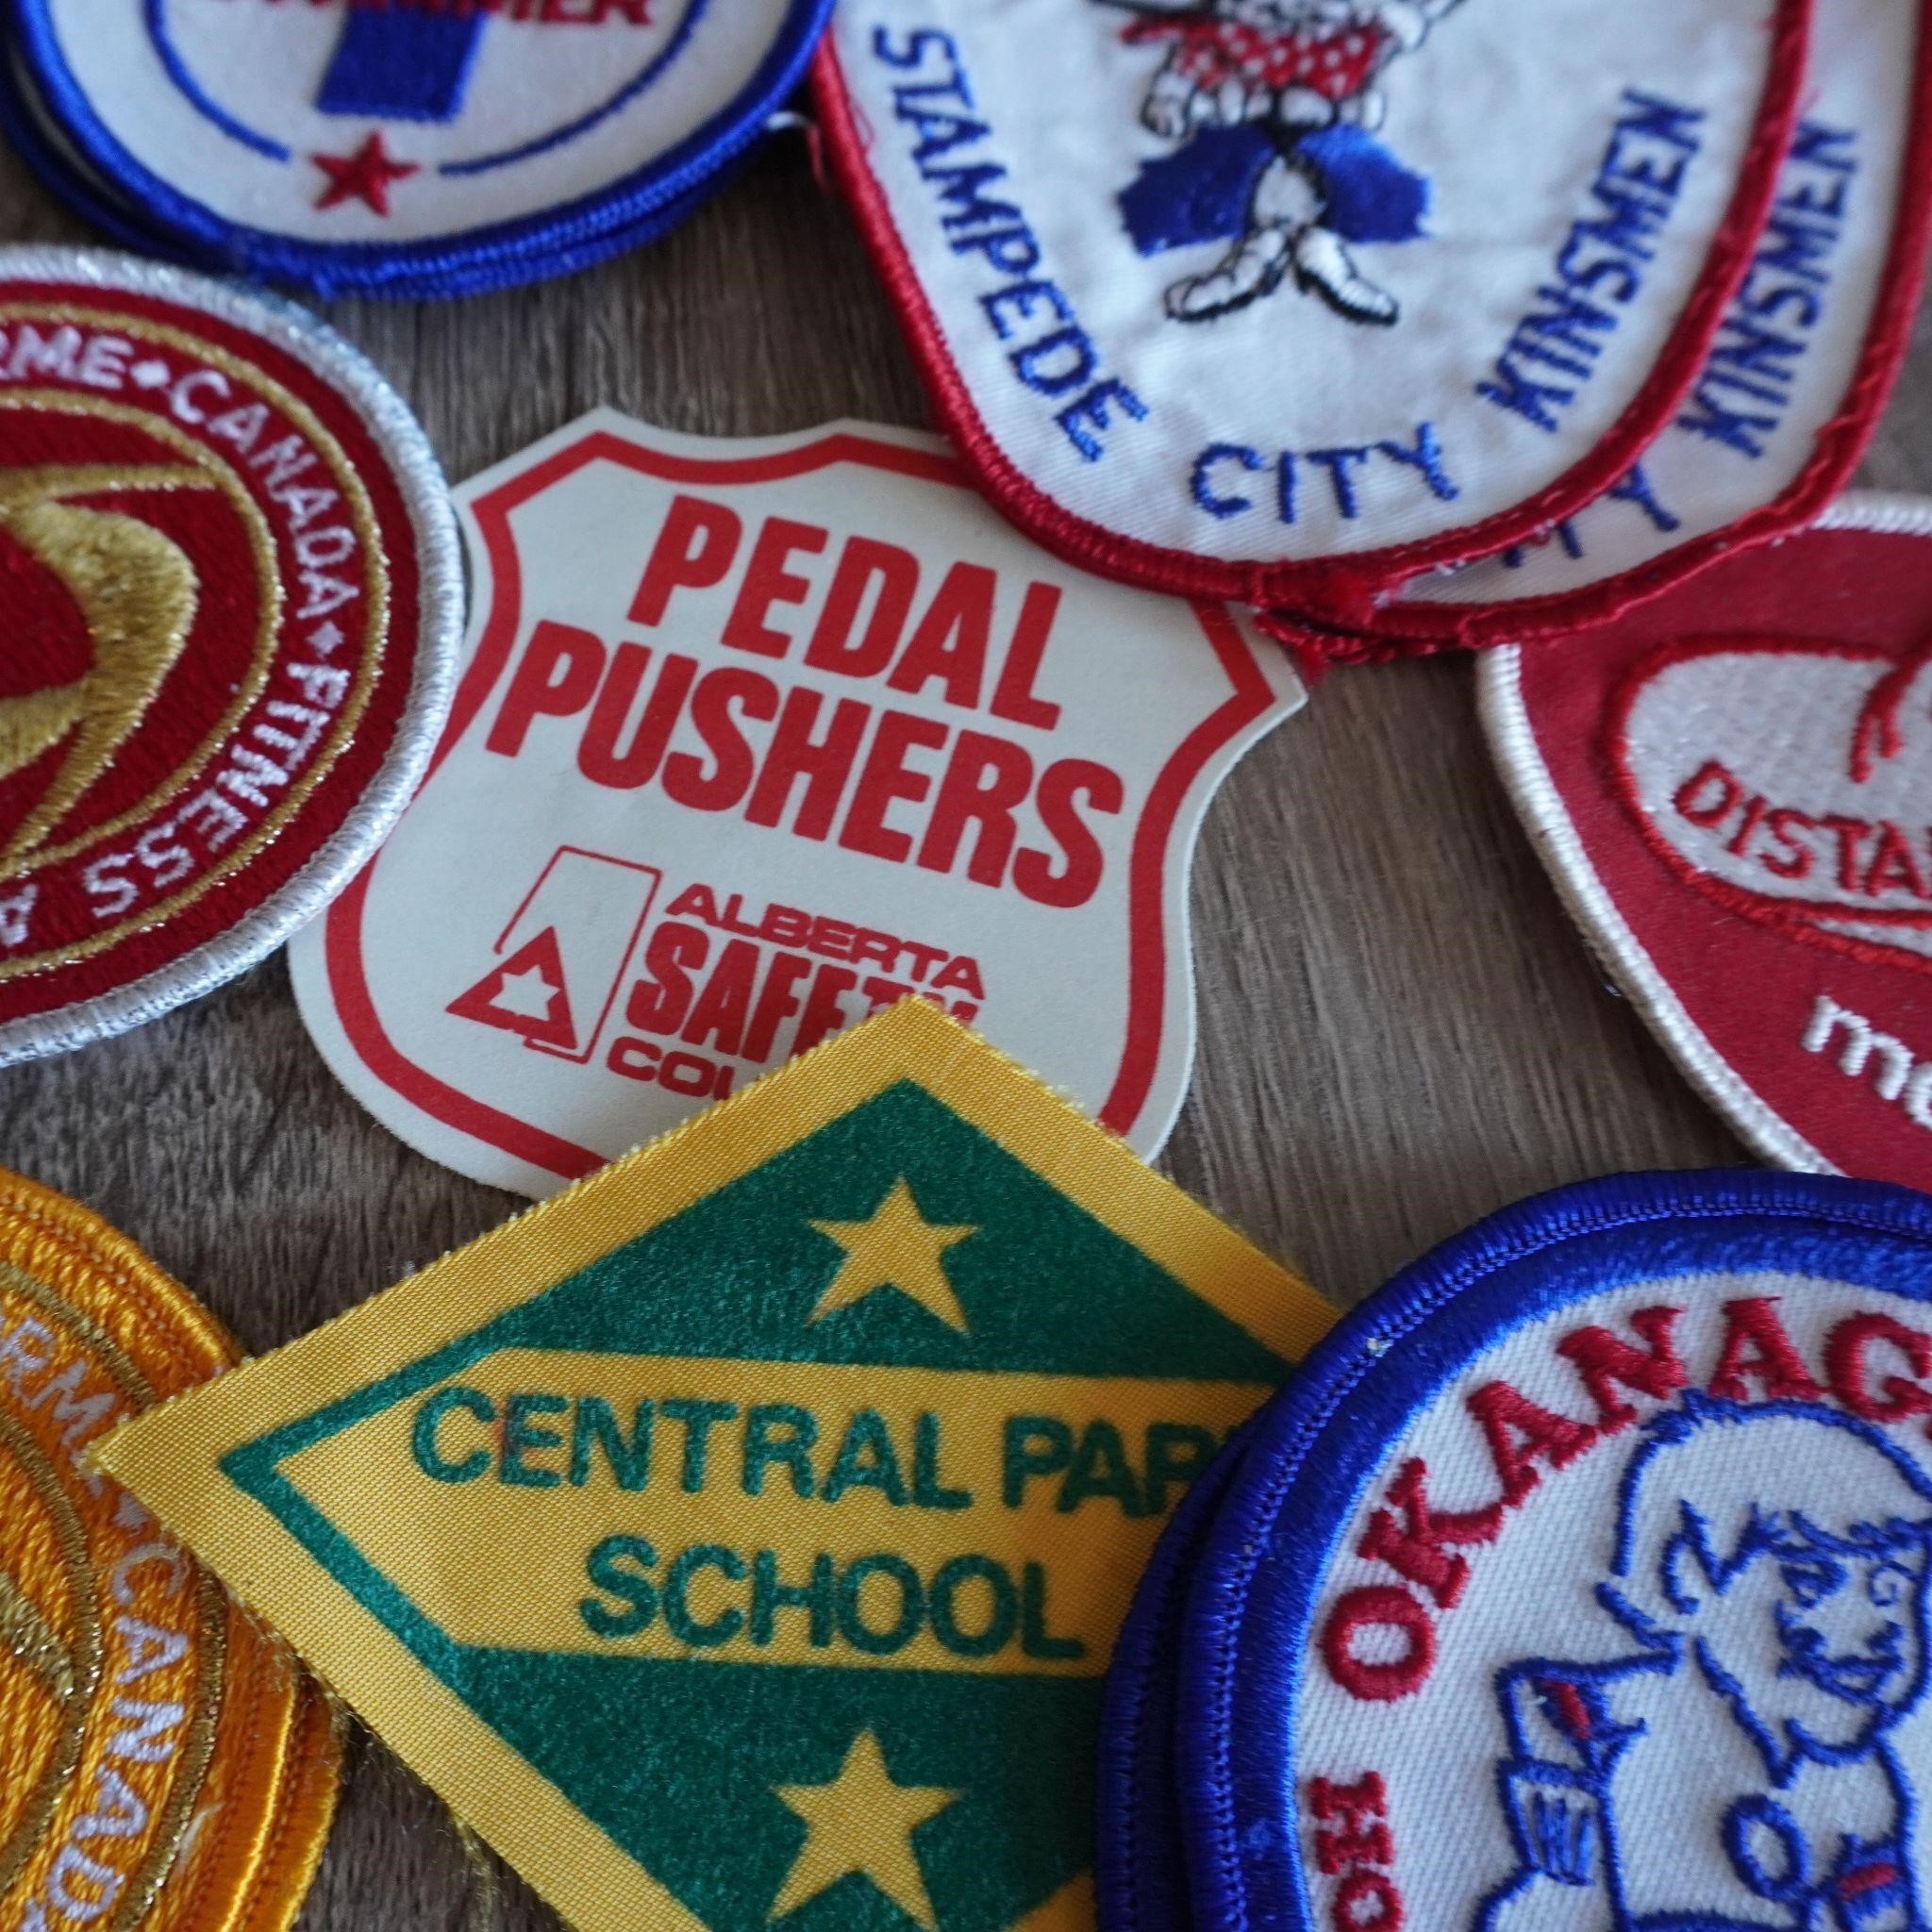 Various patches